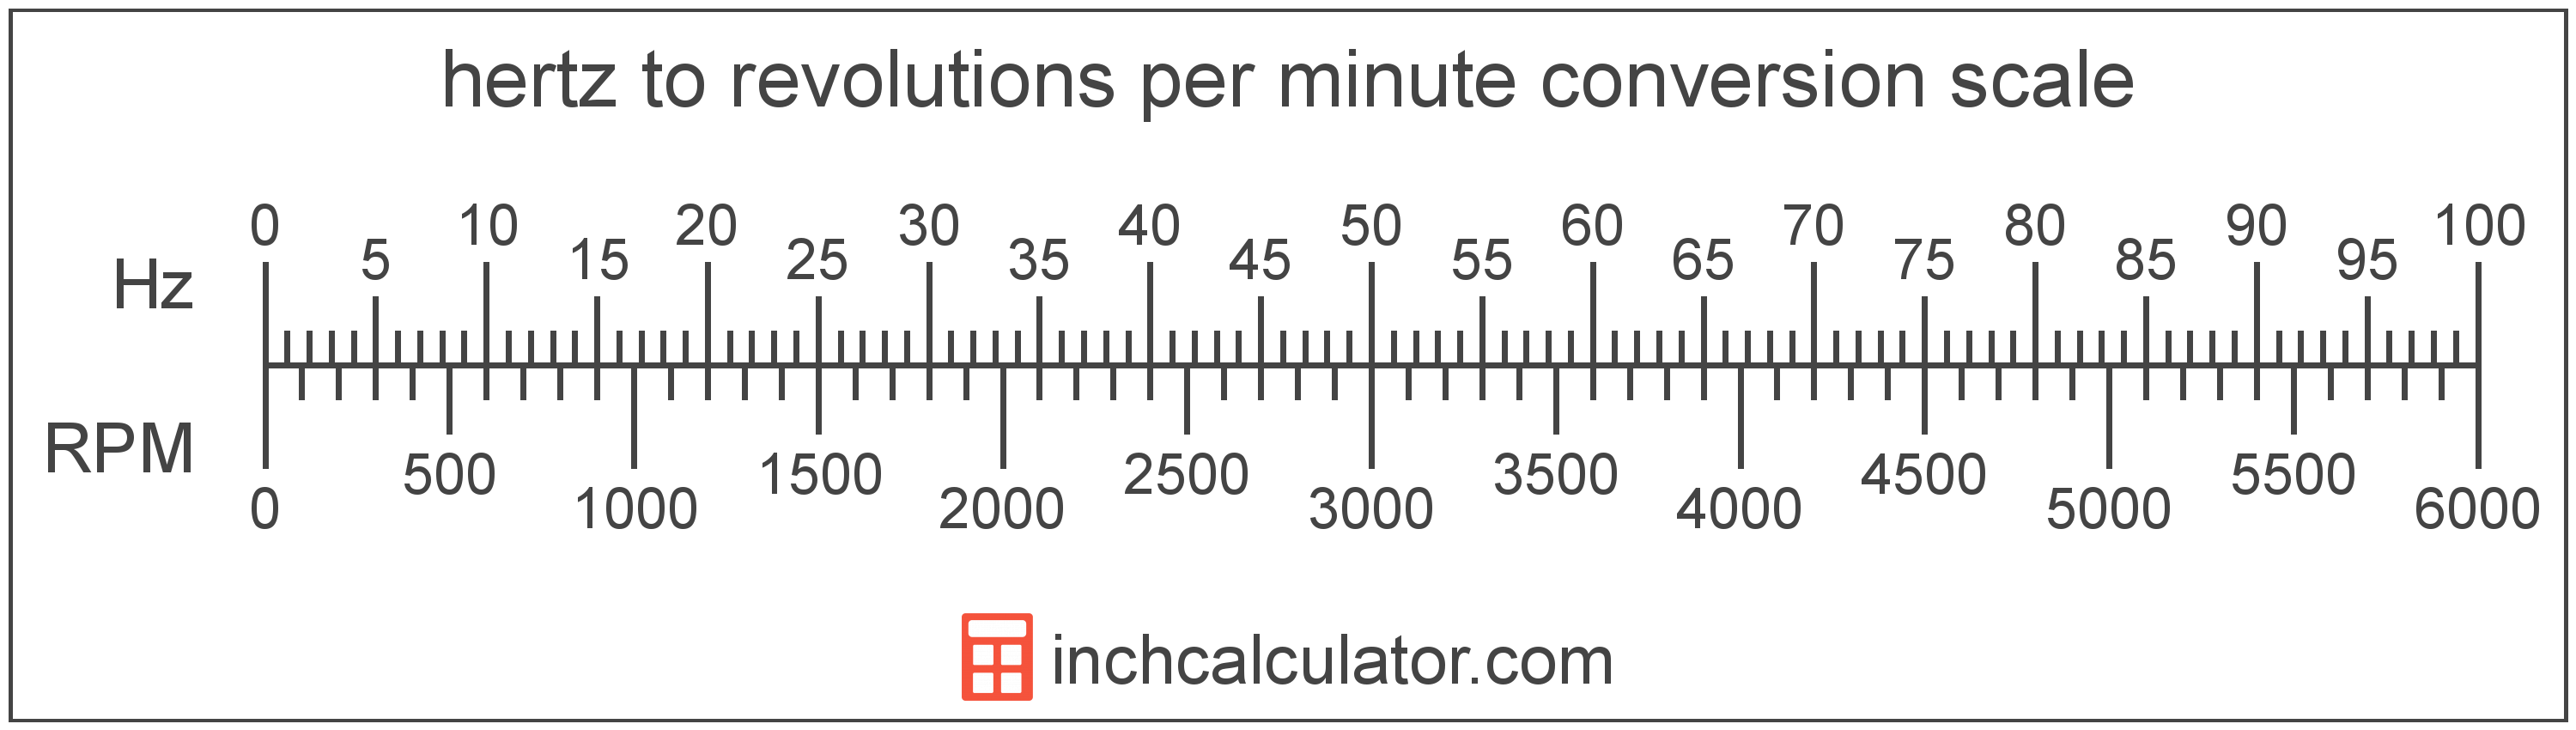 conversion scale showing hertz and equivalent revolutions per minute frequency values